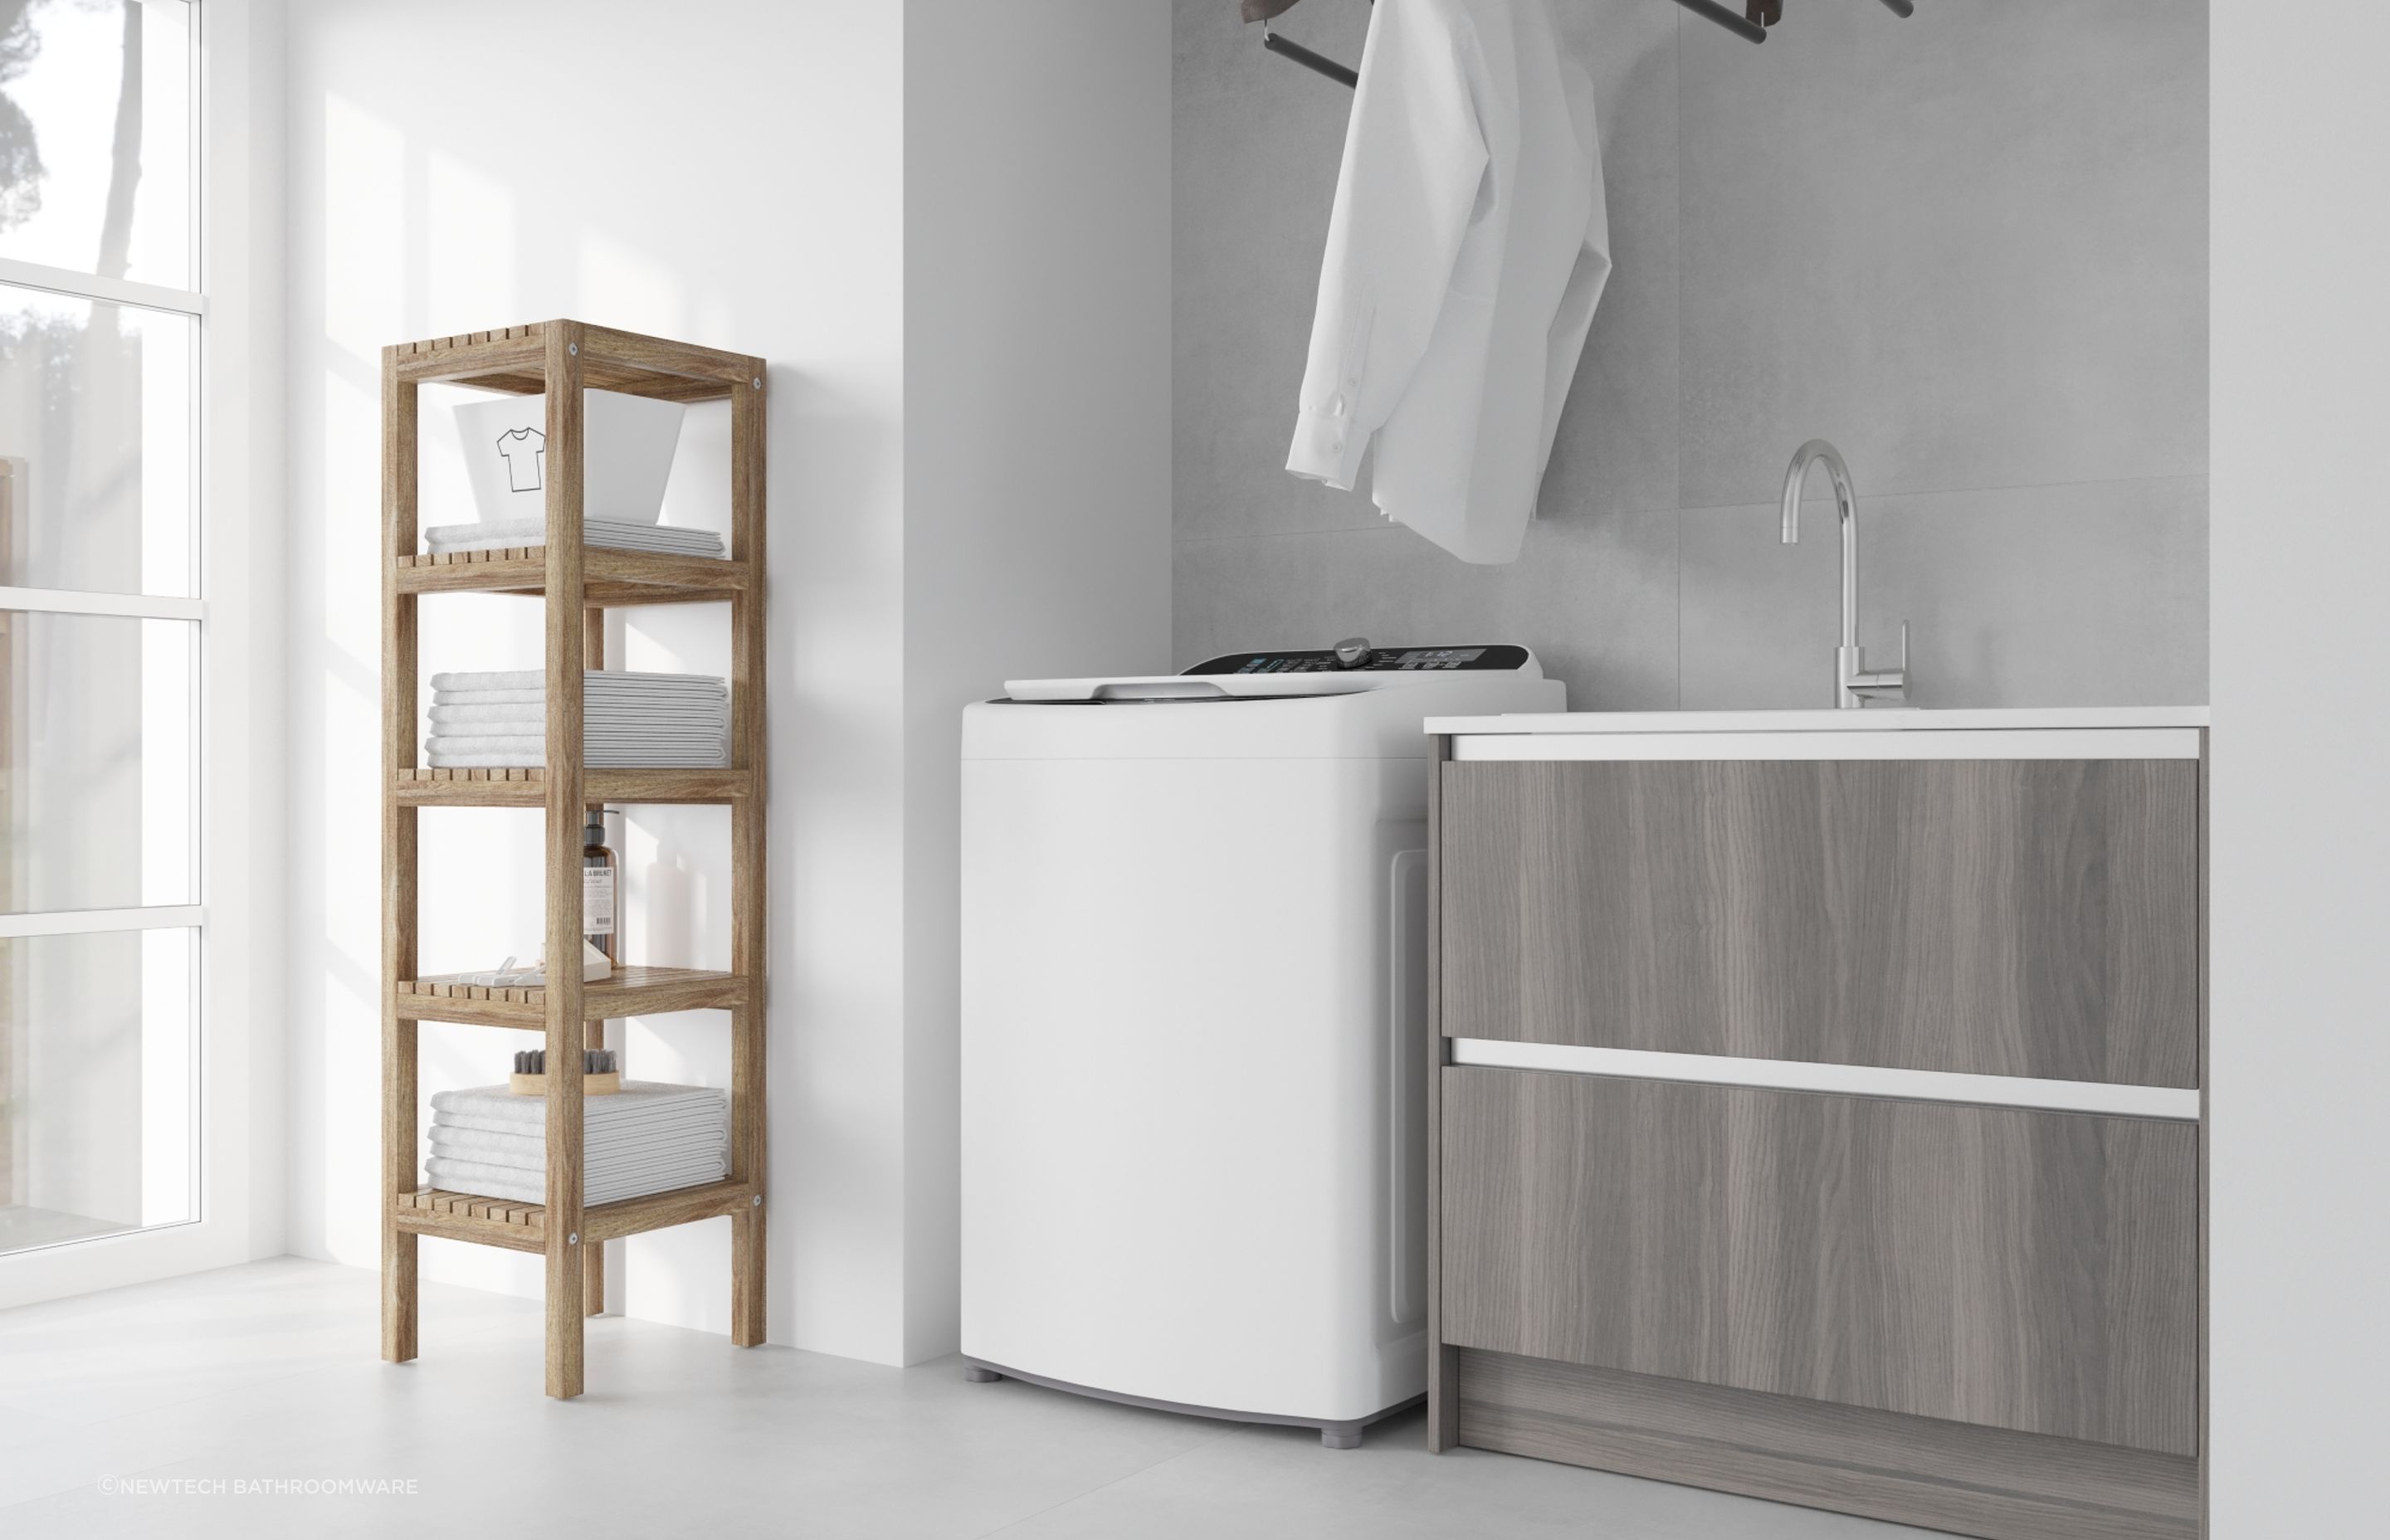 A handy shelving tower for laundry supplies accompanies the stylish Devonport Laundry Package.